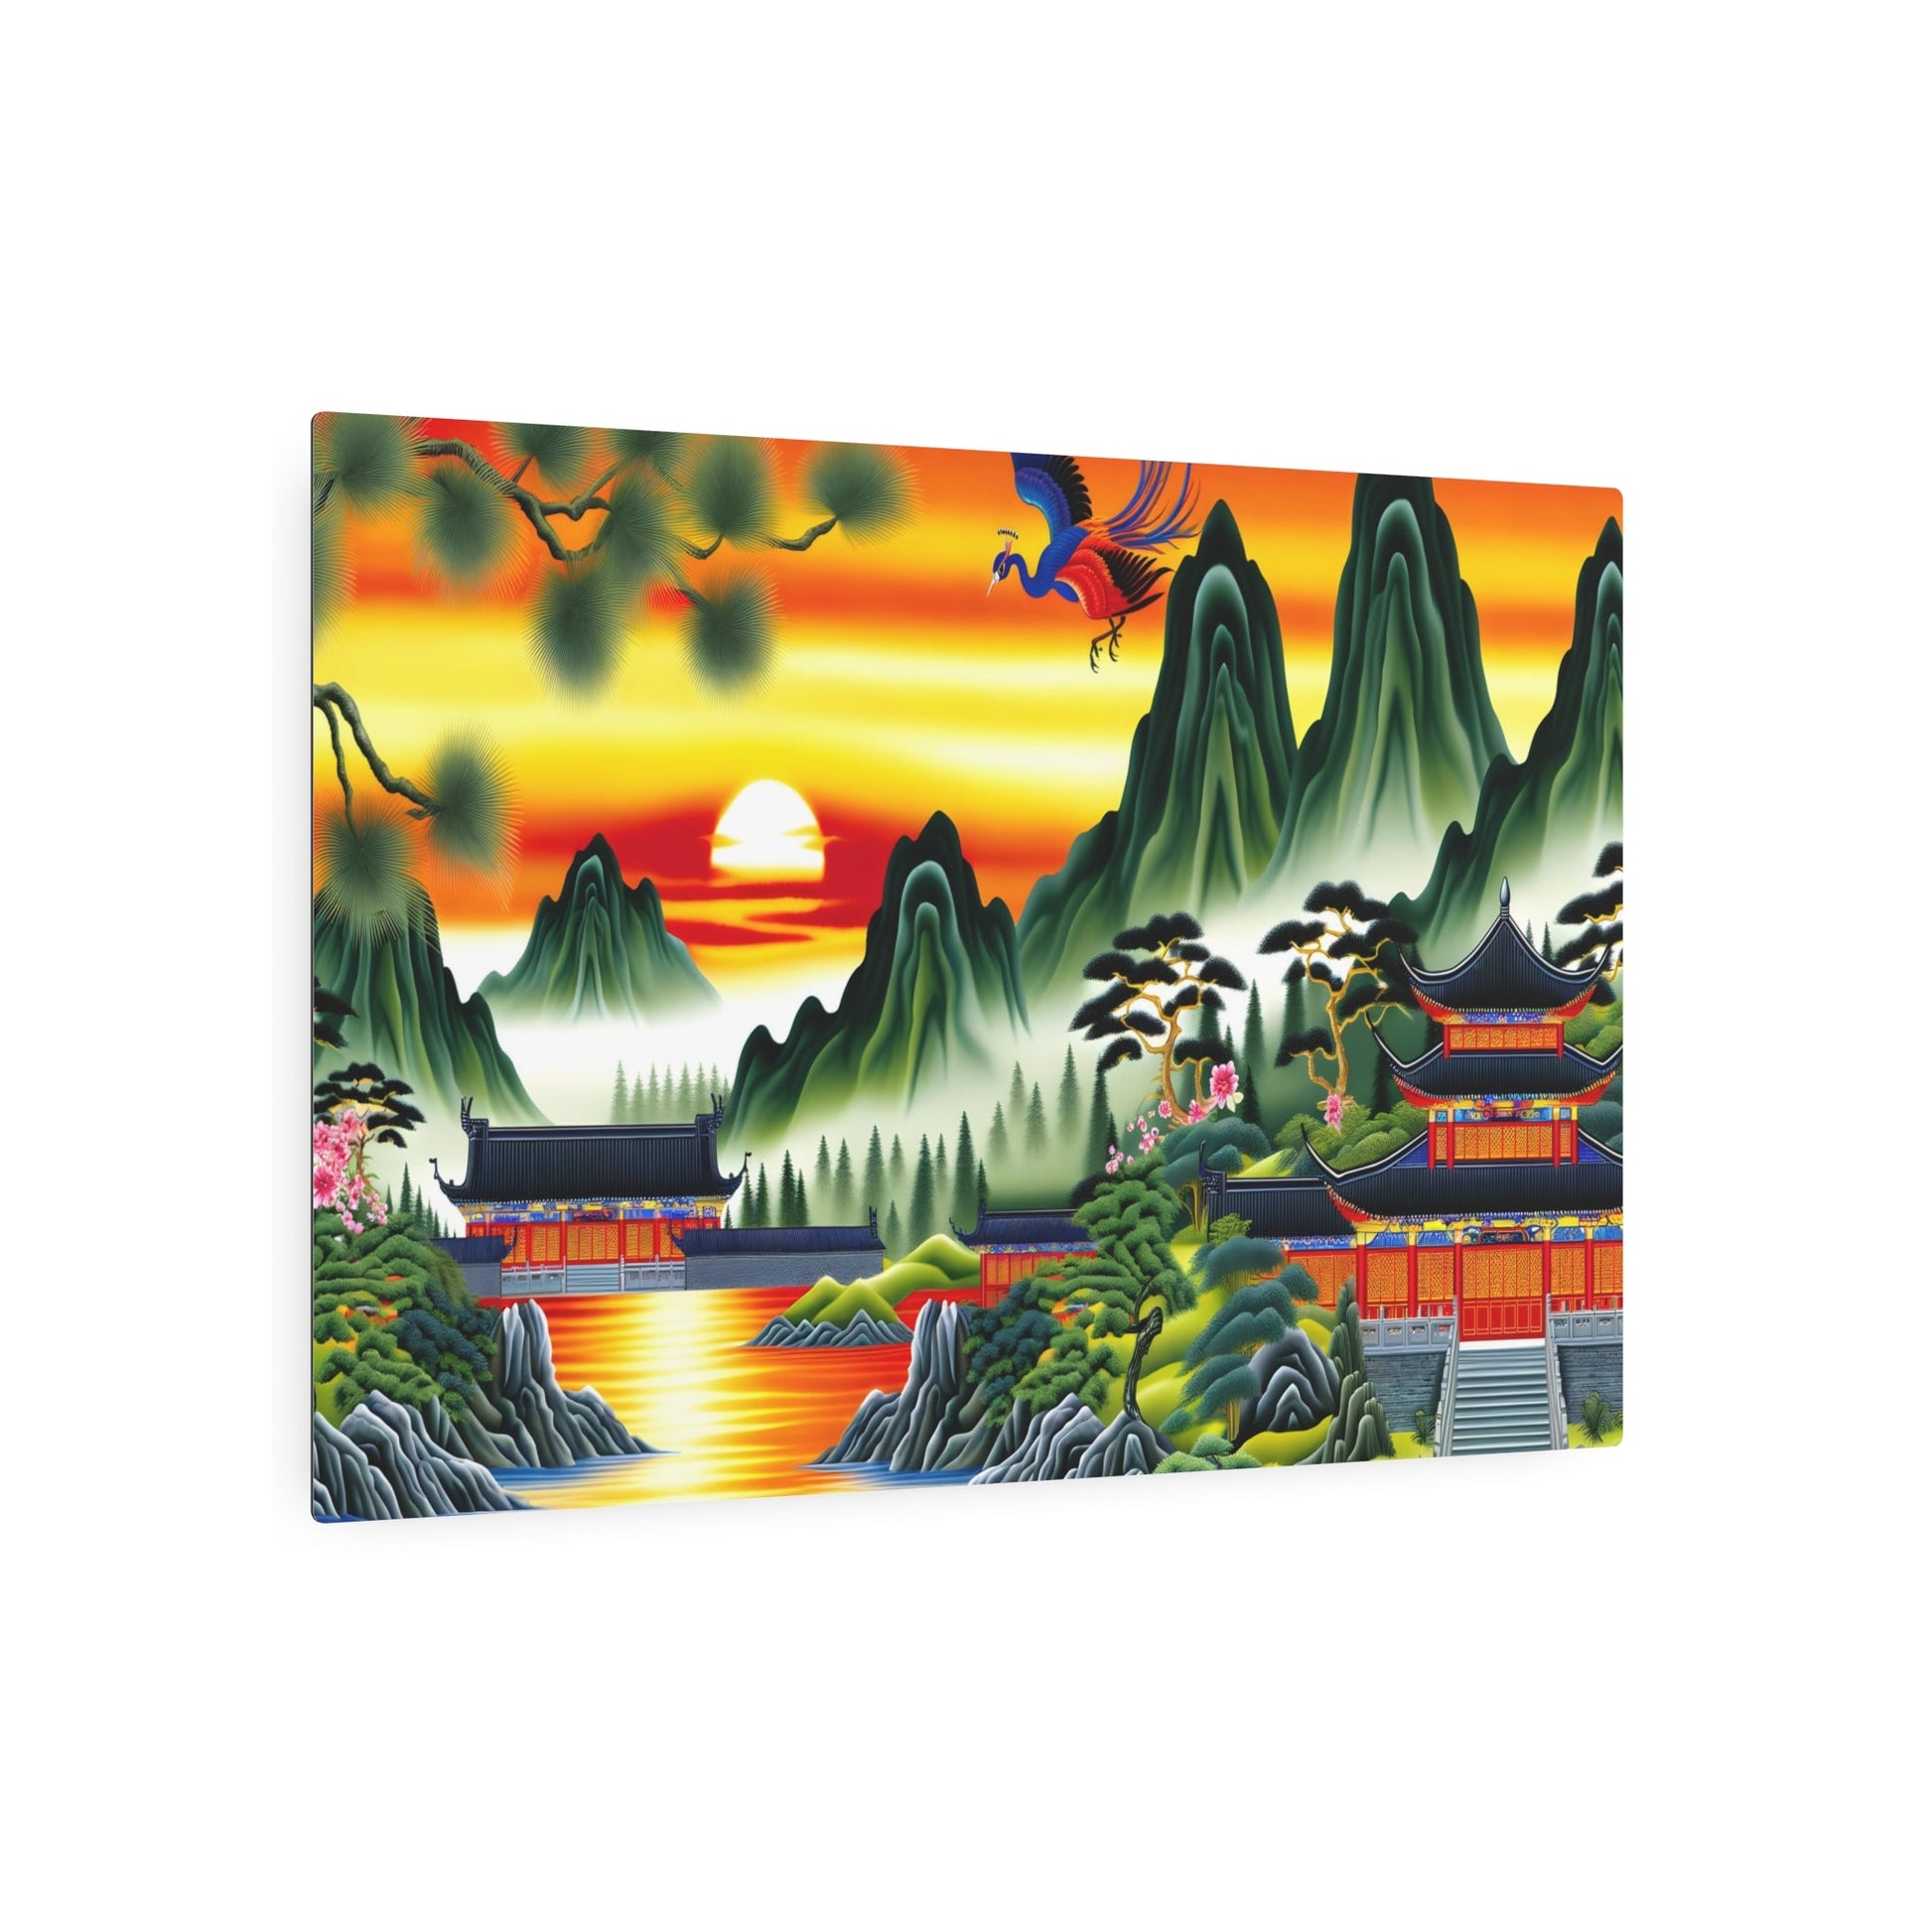 Metal Poster Art | "Traditional Chinese Landscape Art - Majestic Mountains, Serene Waters and Exotic Bird in Vibrant Sunset - Asian Art Styles, Chinese Landscape Sub-category - Metal Poster Art 36″ x 24″ (Horizontal) 0.12''